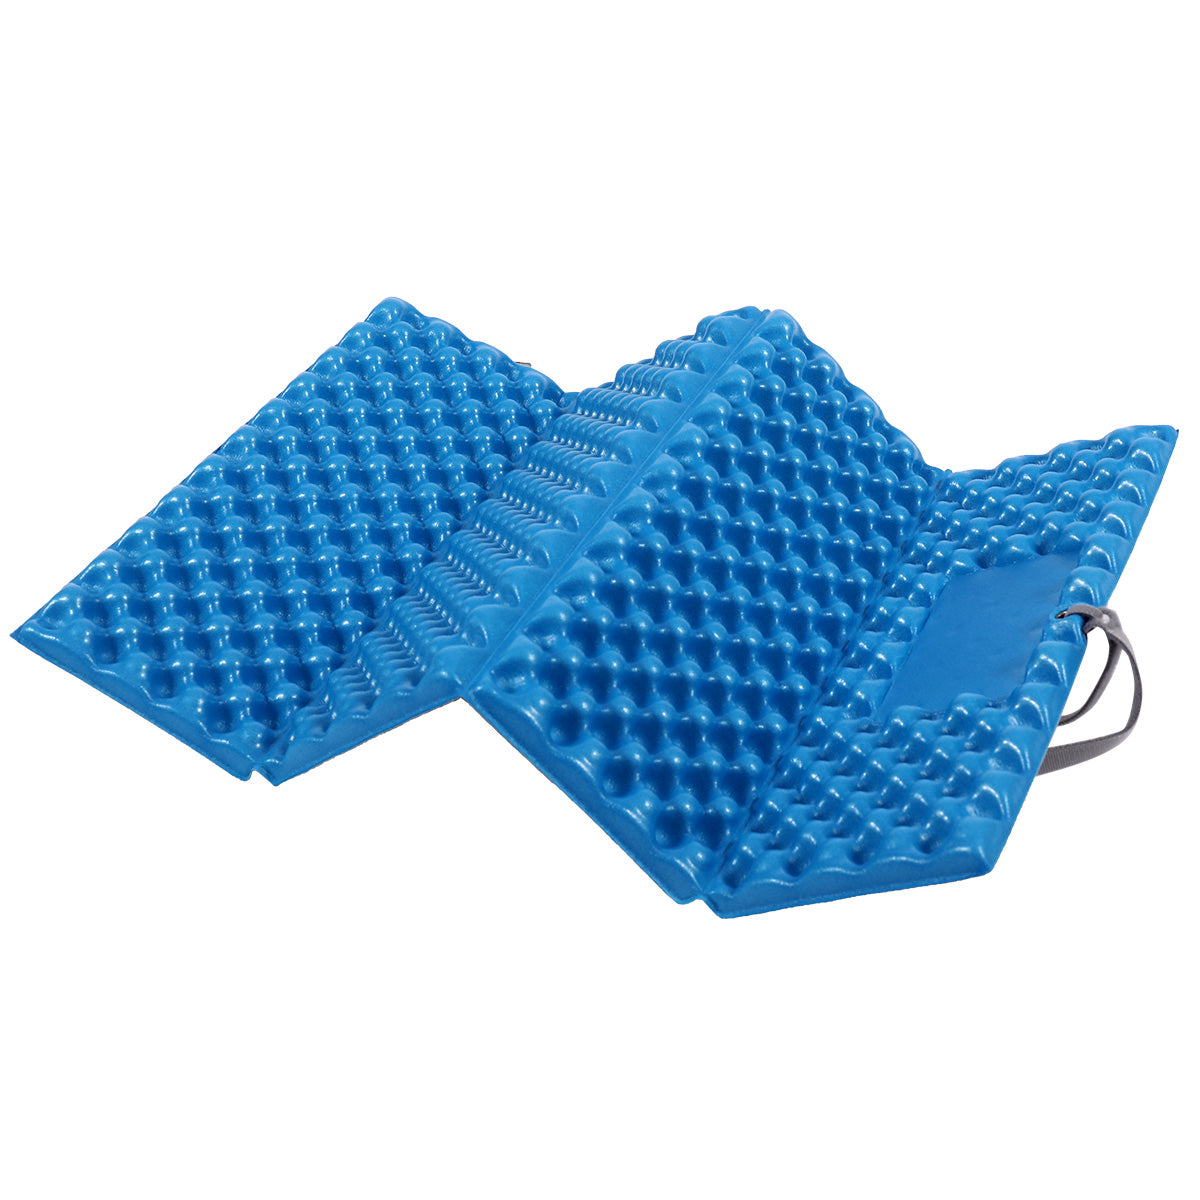 REDCAMP Foam Backpacking Sit Pad 1/2/4 PCS, Ultralight Foldable Z Hiking  Seat Pad Insulated Sitting Pad for Outdoor Camping Stadium Picnic